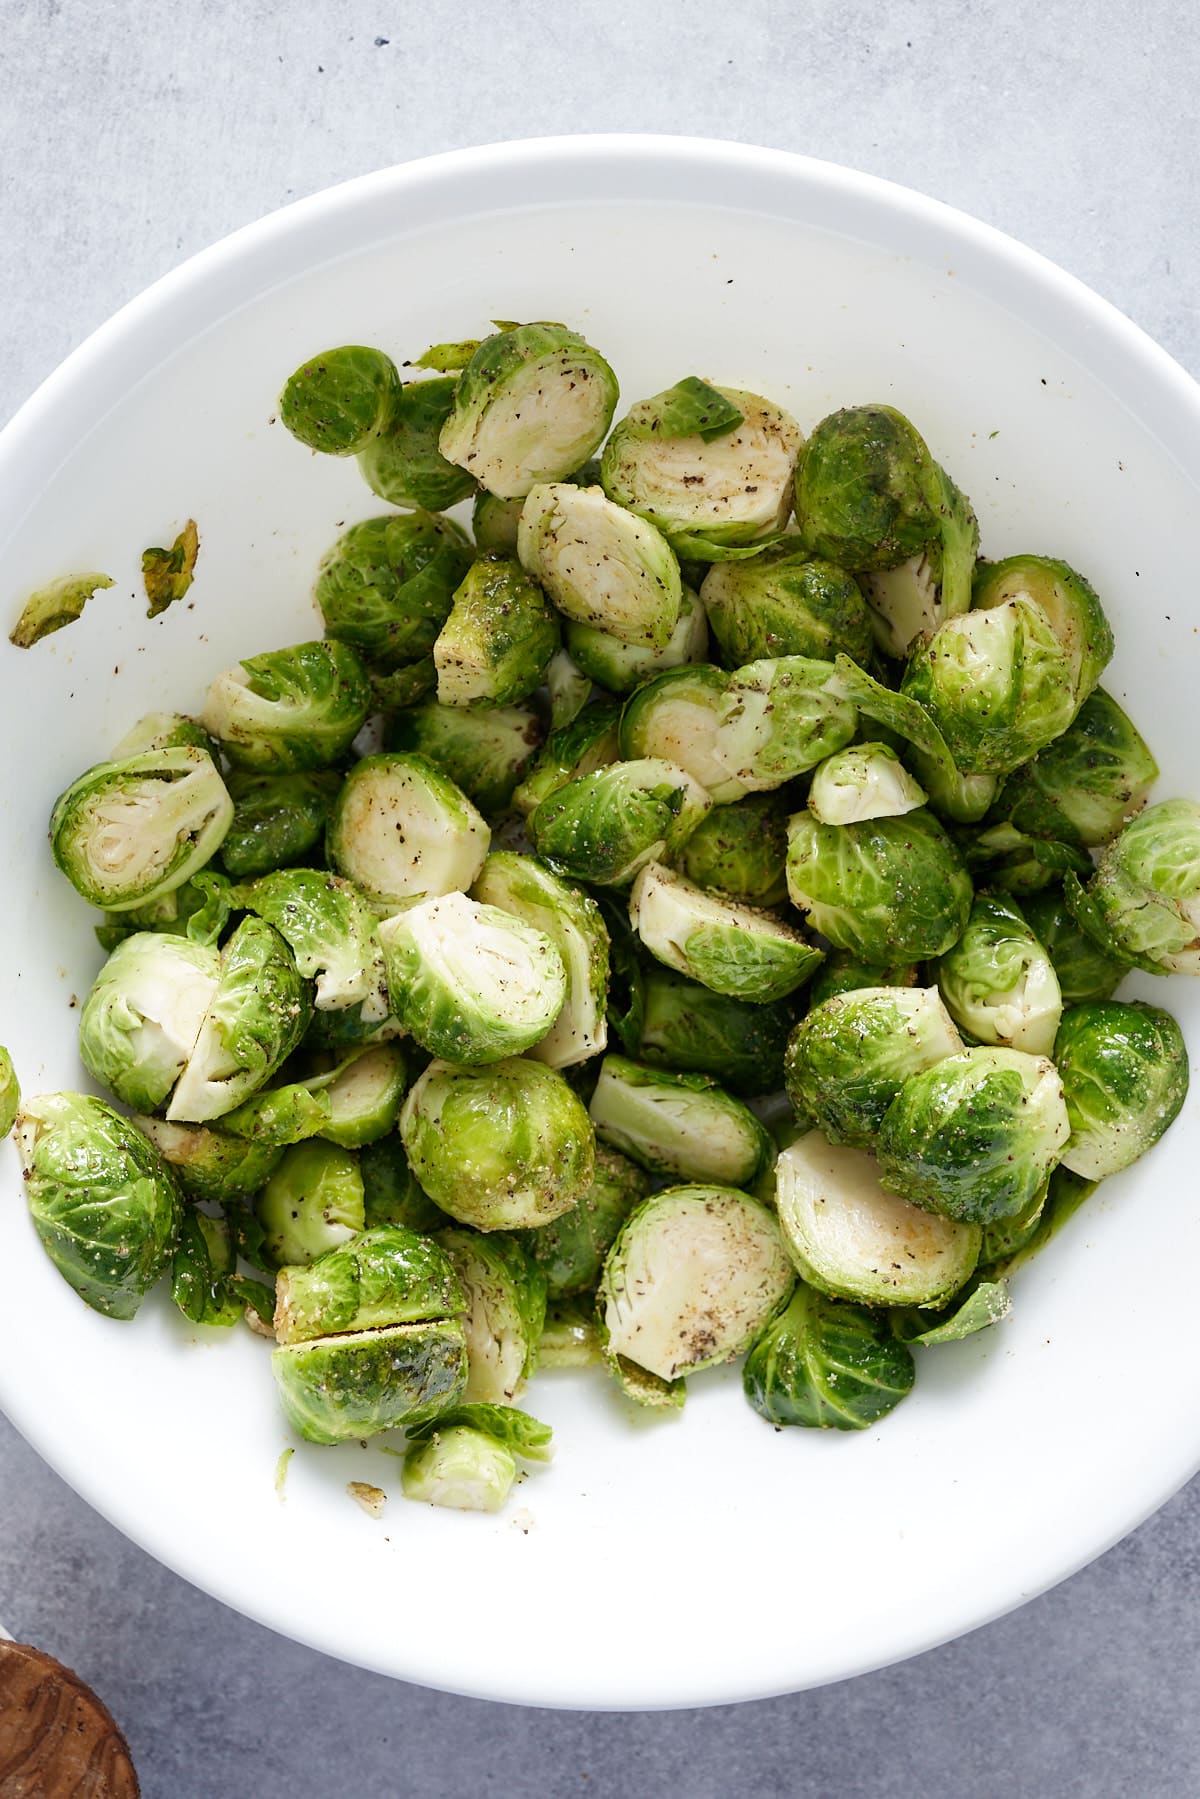 halved brussels sprouts in a bowl tossed in seasonings